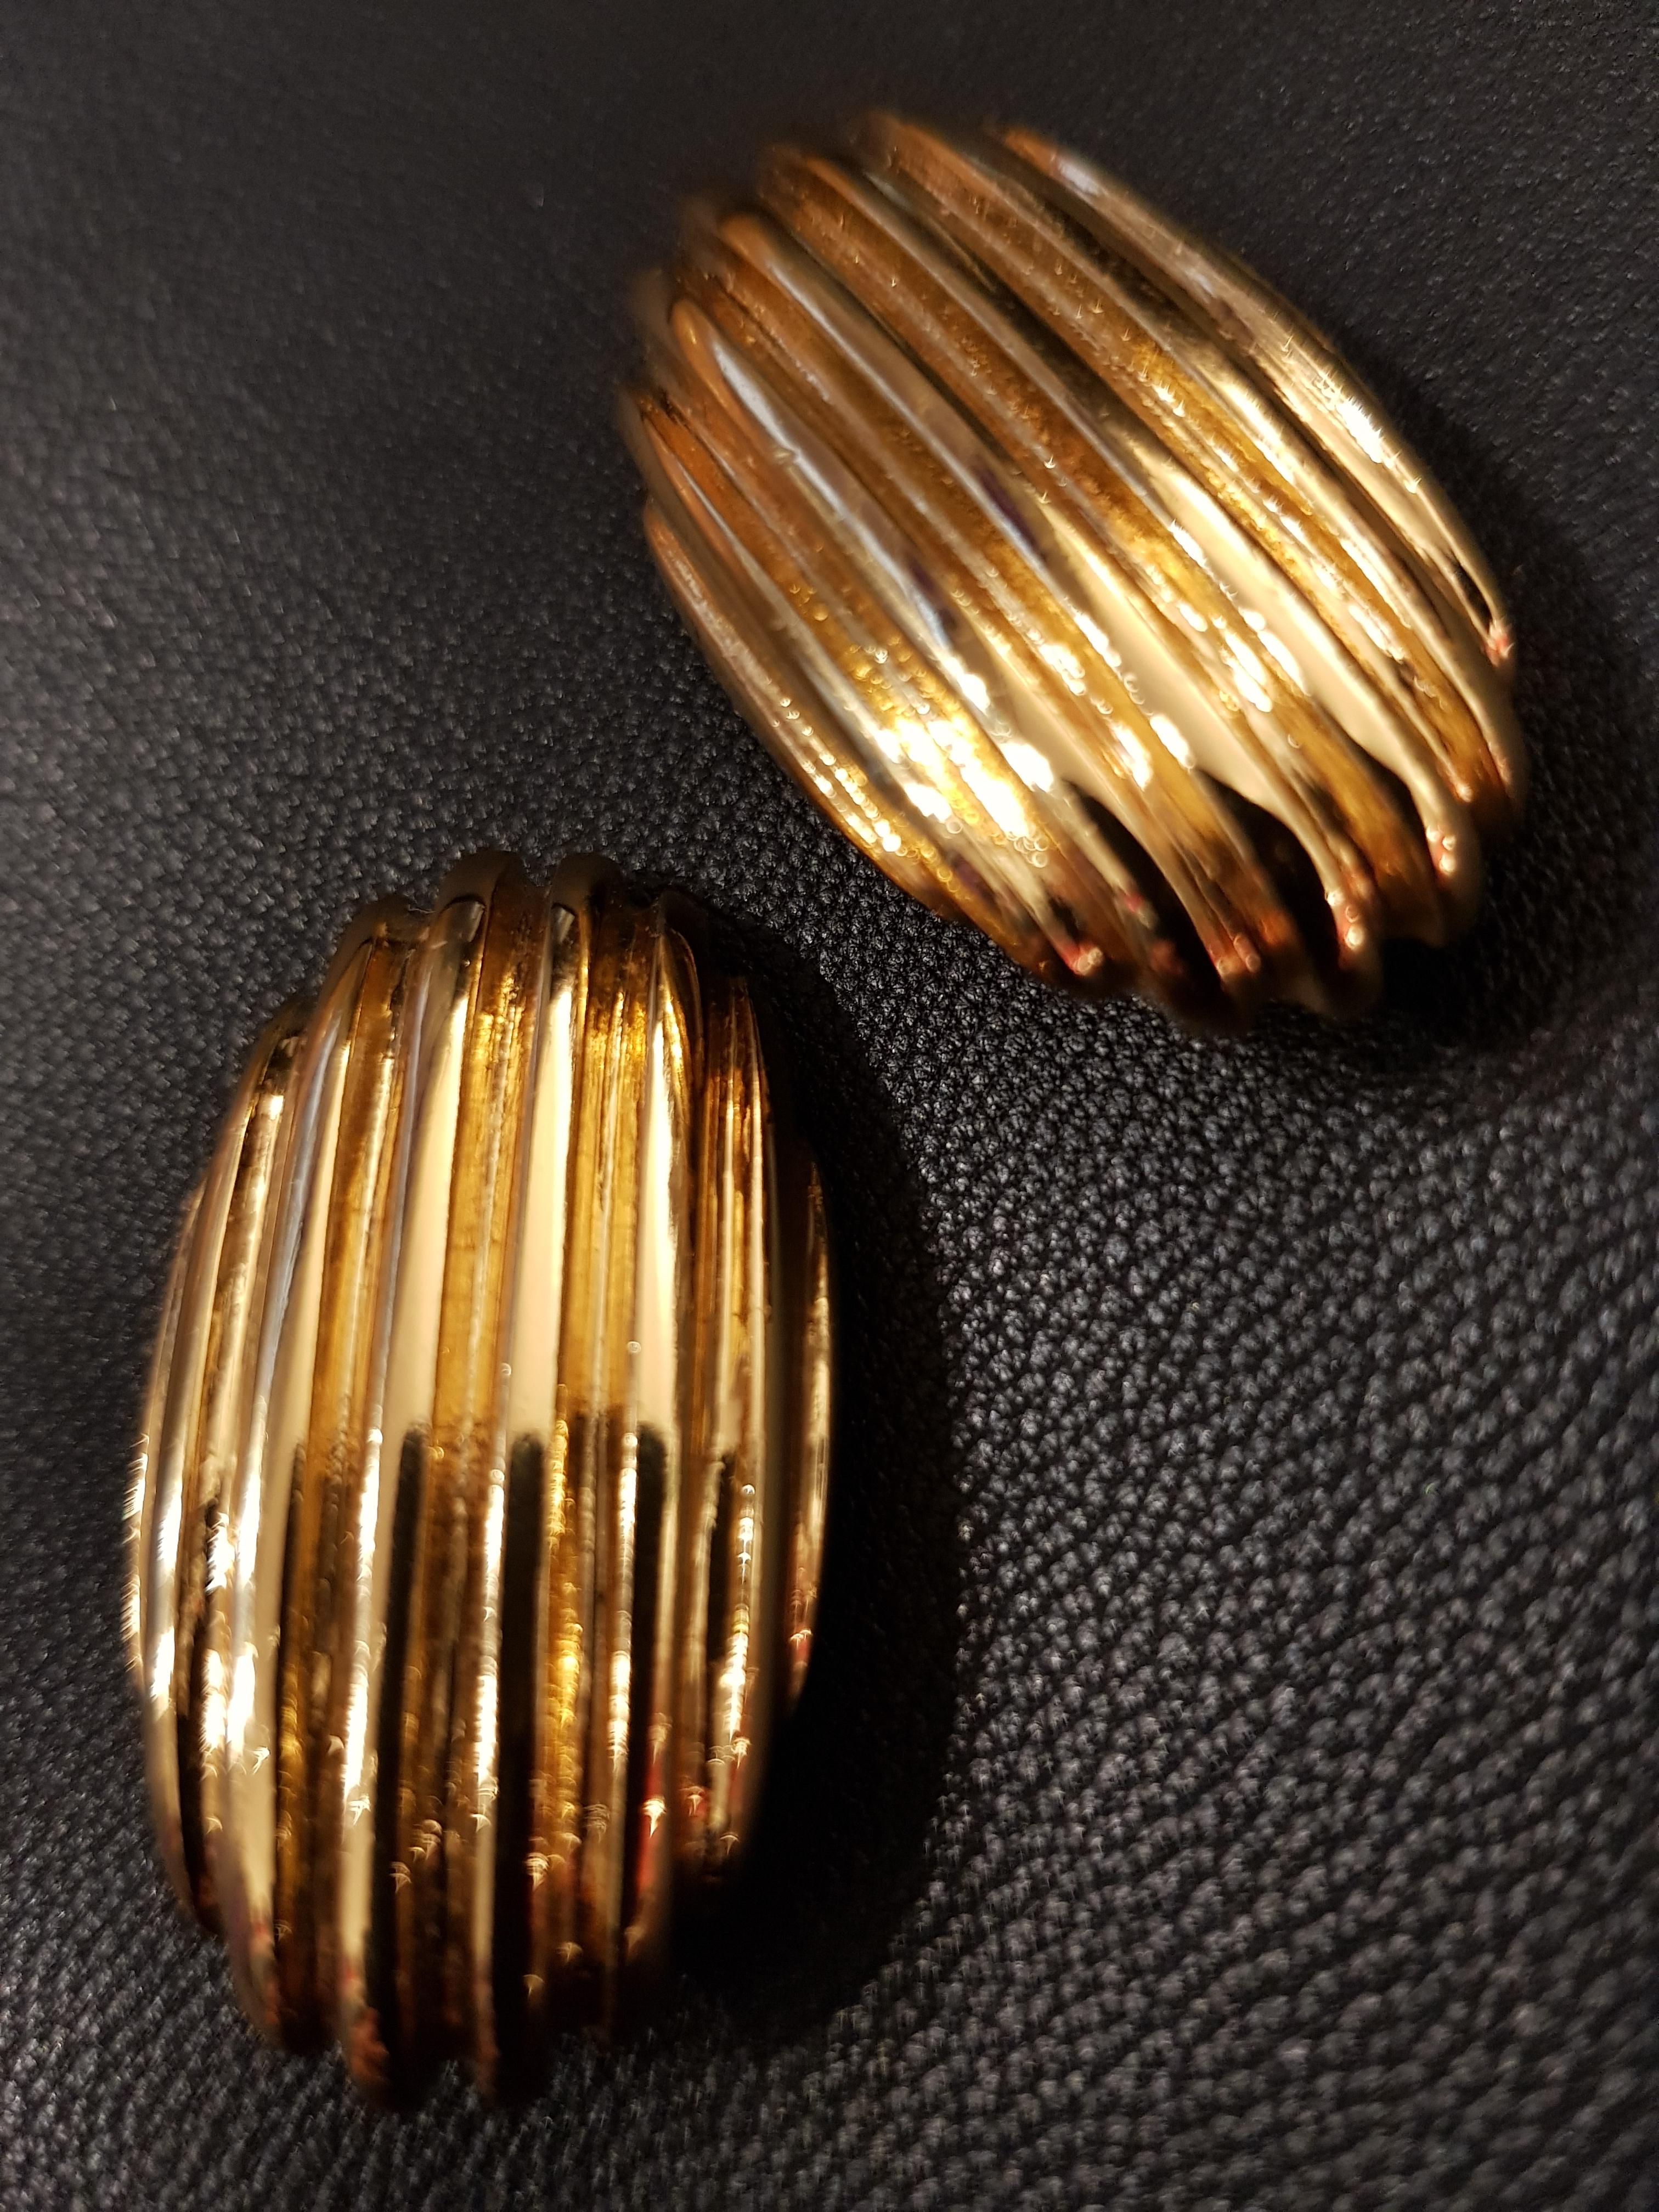 Fabulous Claude Montana 80s gold tone earrings

-Gold-tone
-Signature on the back
-Made in France
-100% Gilt metal
-Circa 1980 - 1989
-Very good conditions